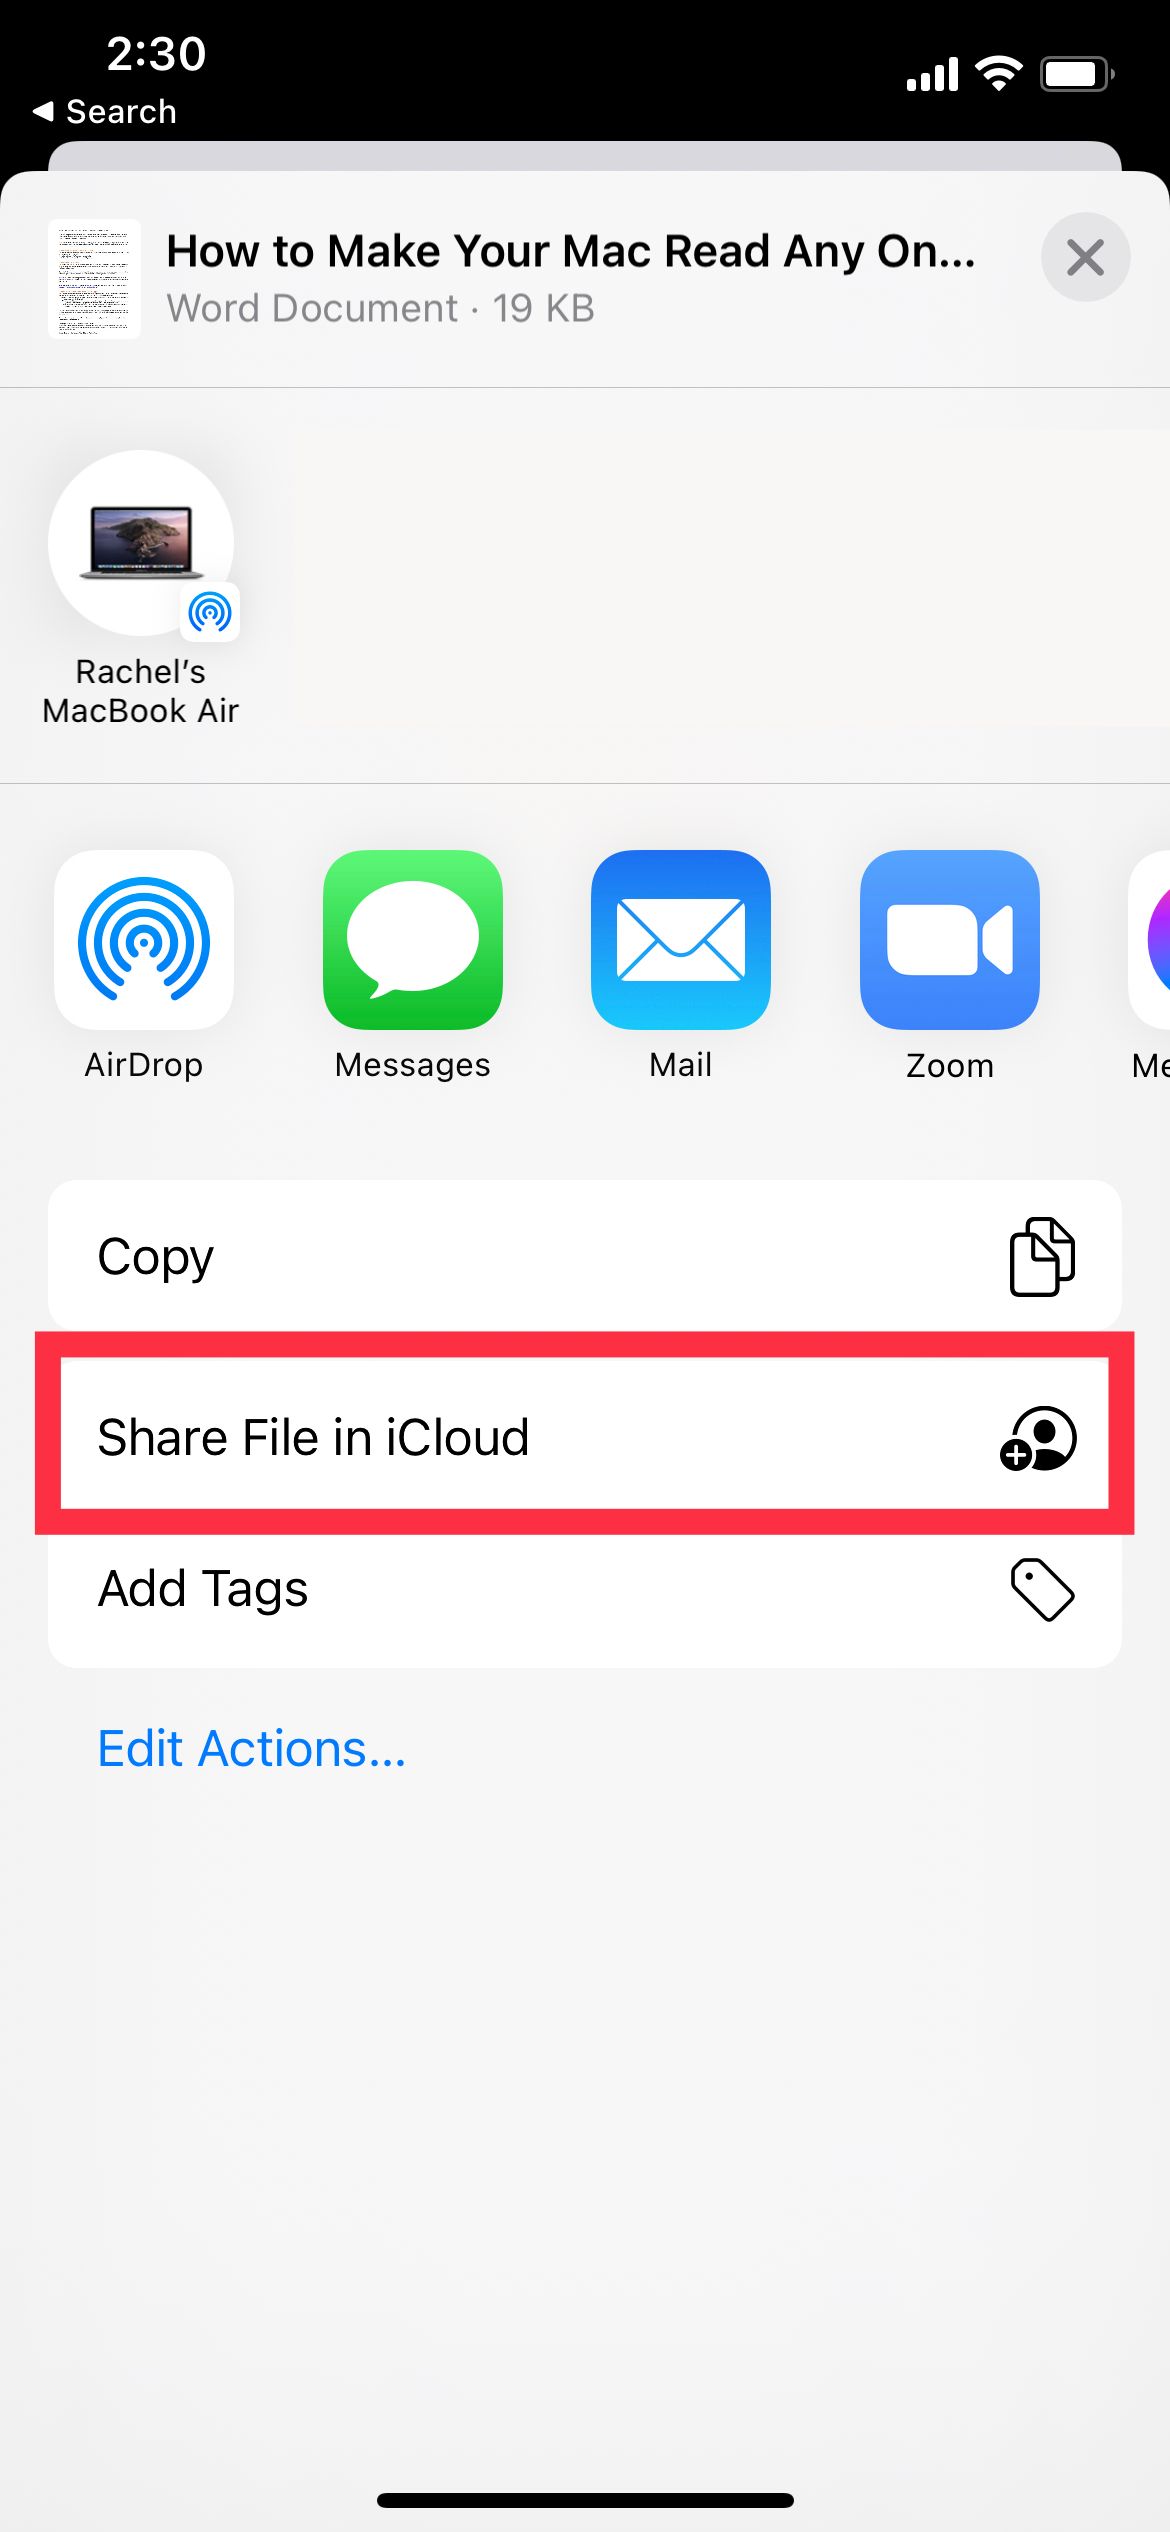 Share File in iCloud Option